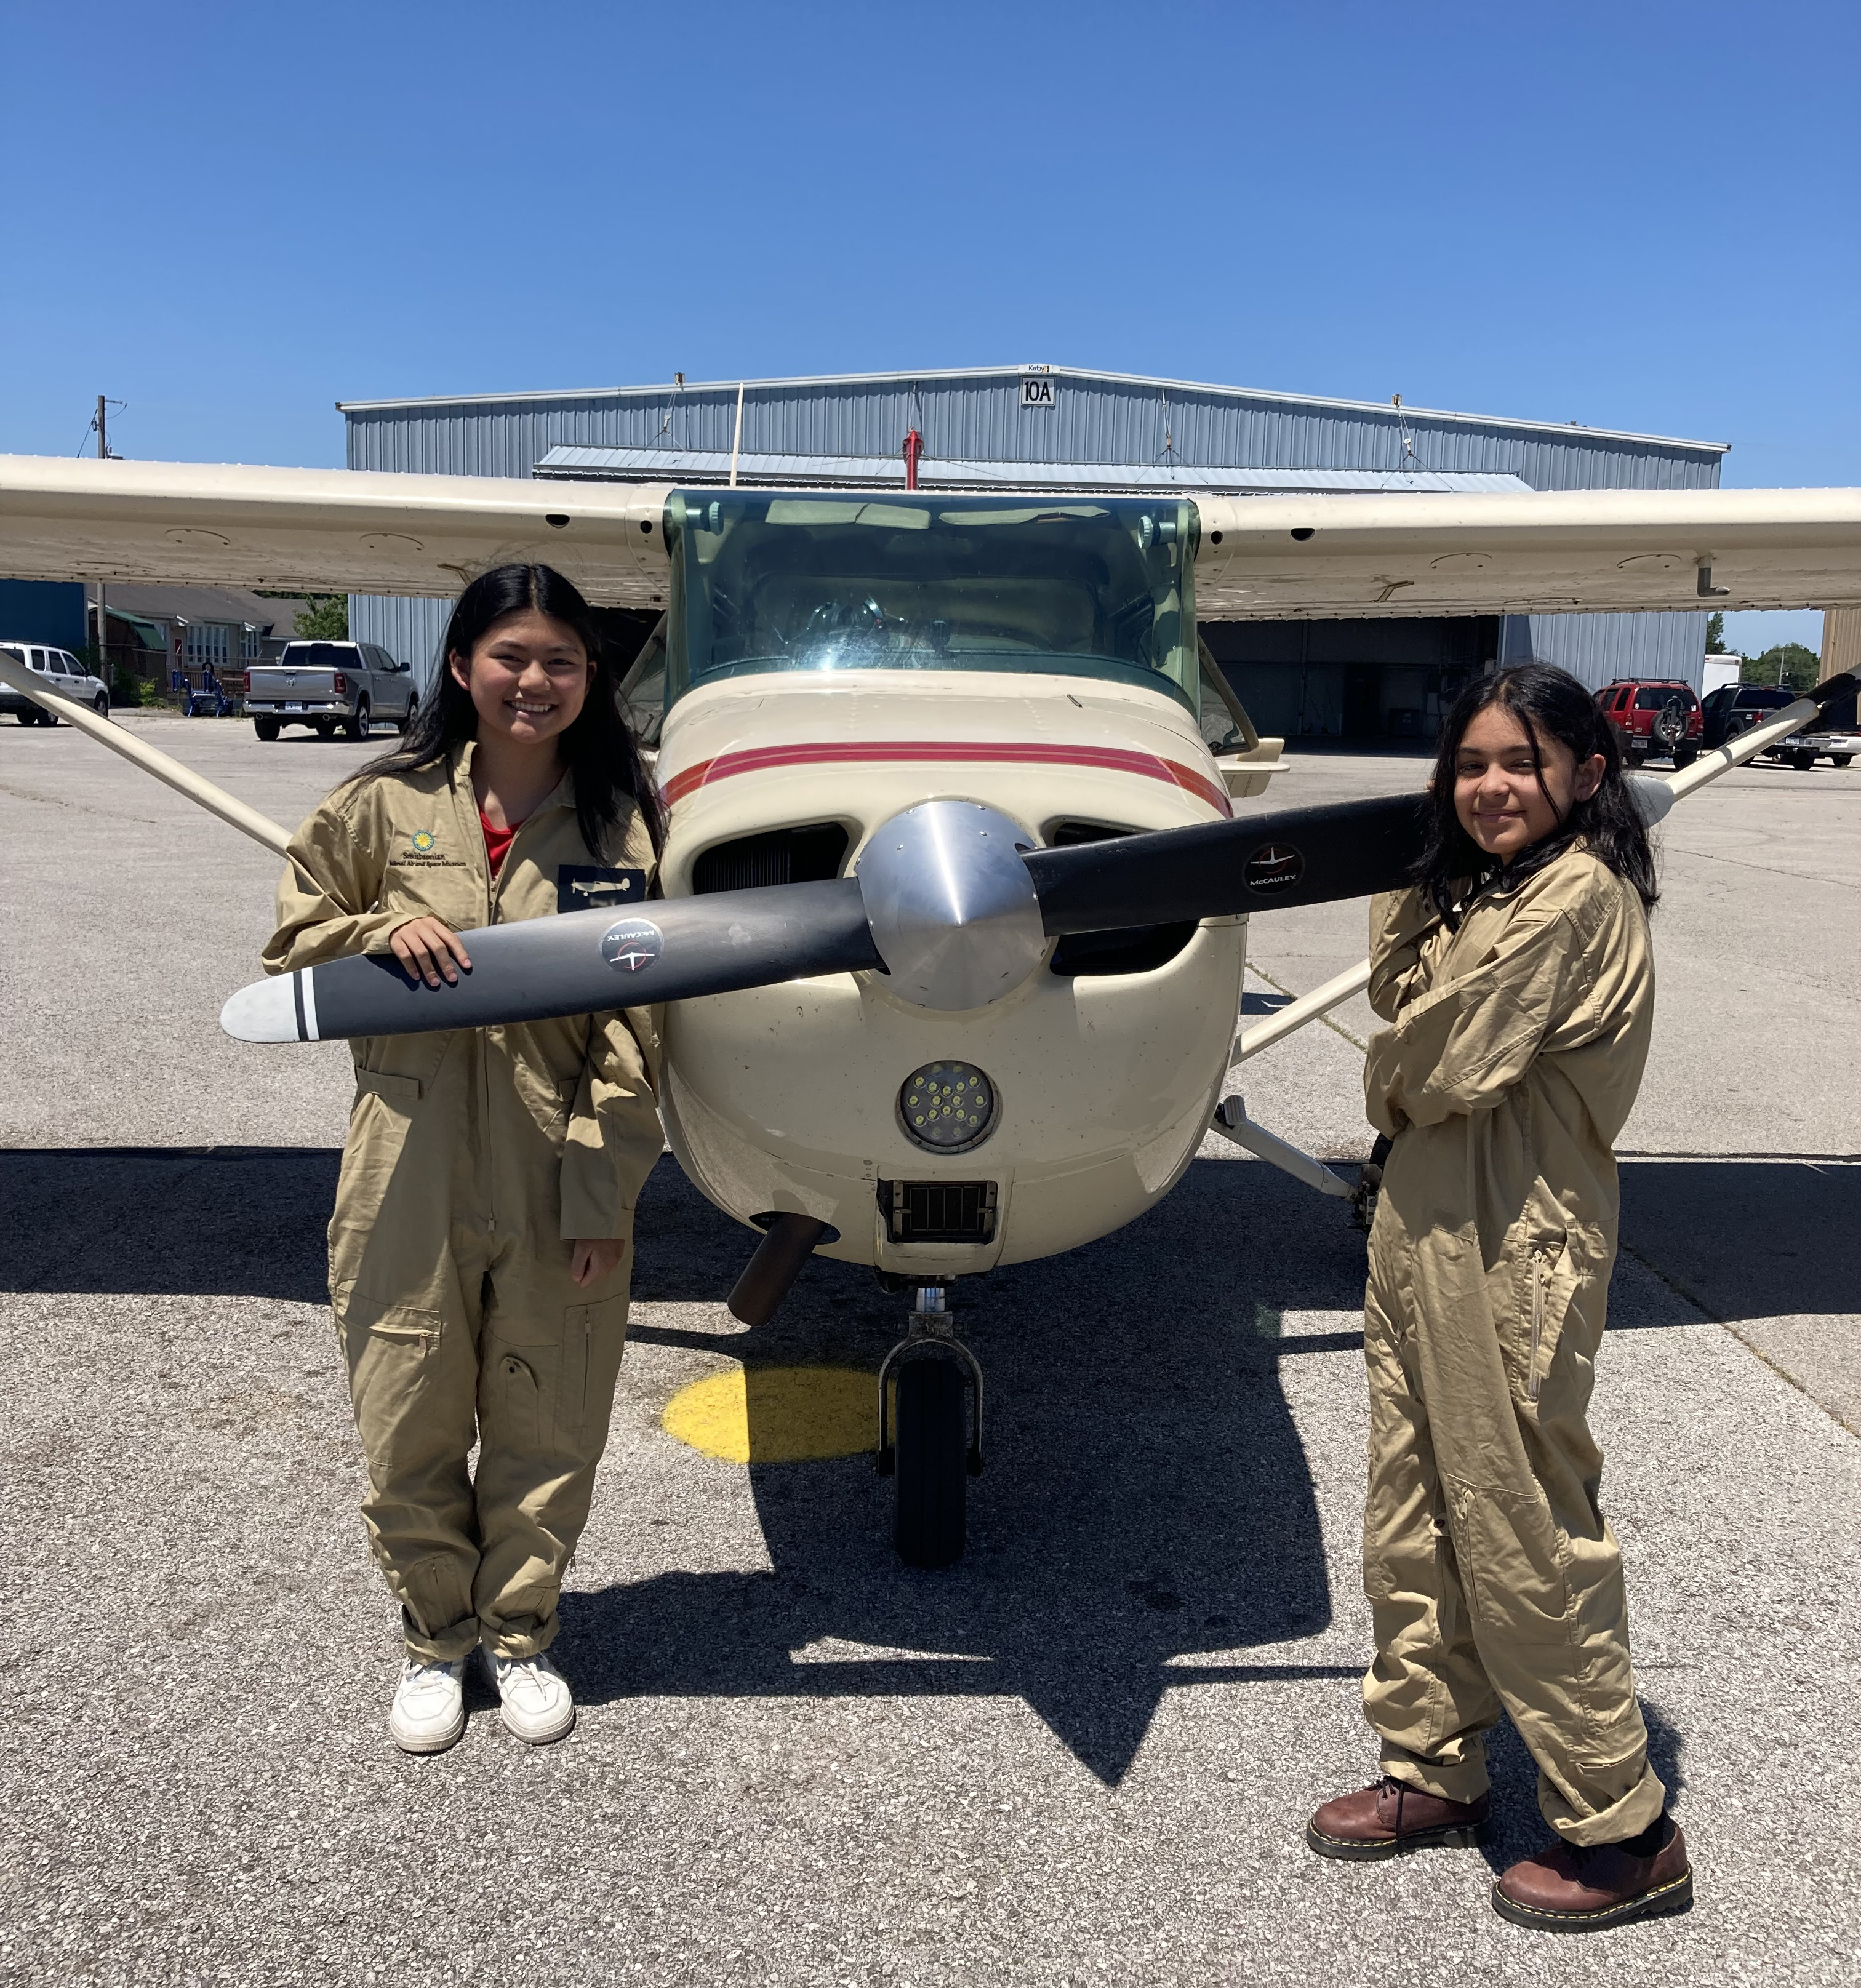 Two teenagers stand outside next to small plane and its propellers